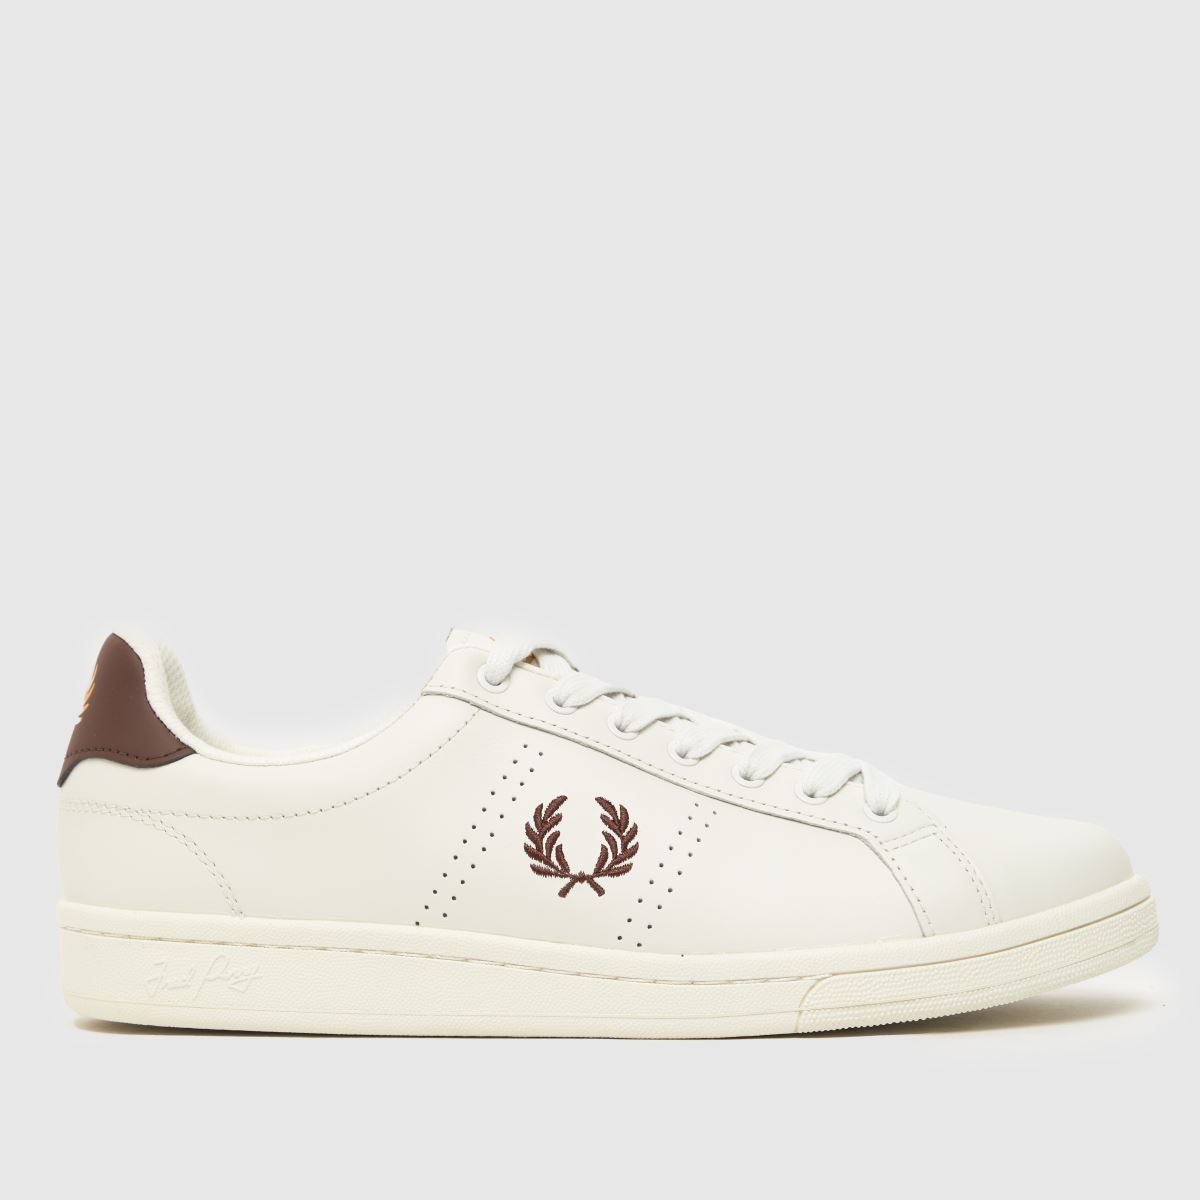 Fred Perry b721 trainers in white & brown